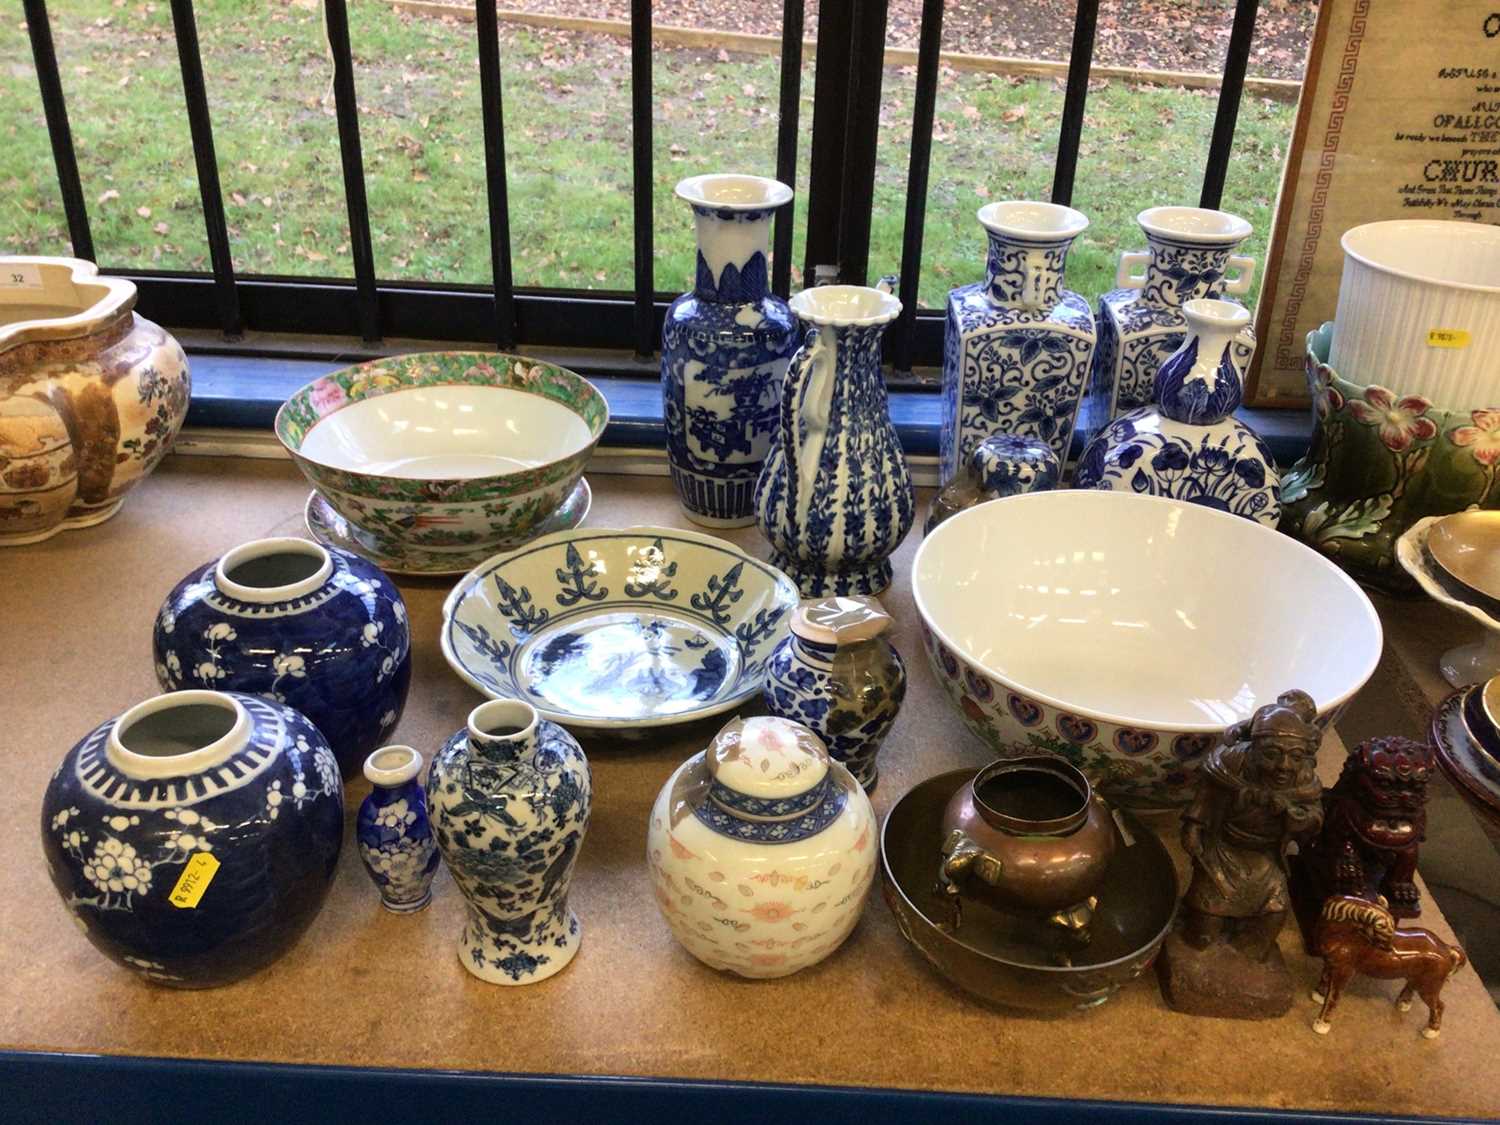 Lot 33 - Quantity of antique and later Chinese porcelain, including Canton bowl and dish, blue and white prunus jars, etc, together with other Chinese objects